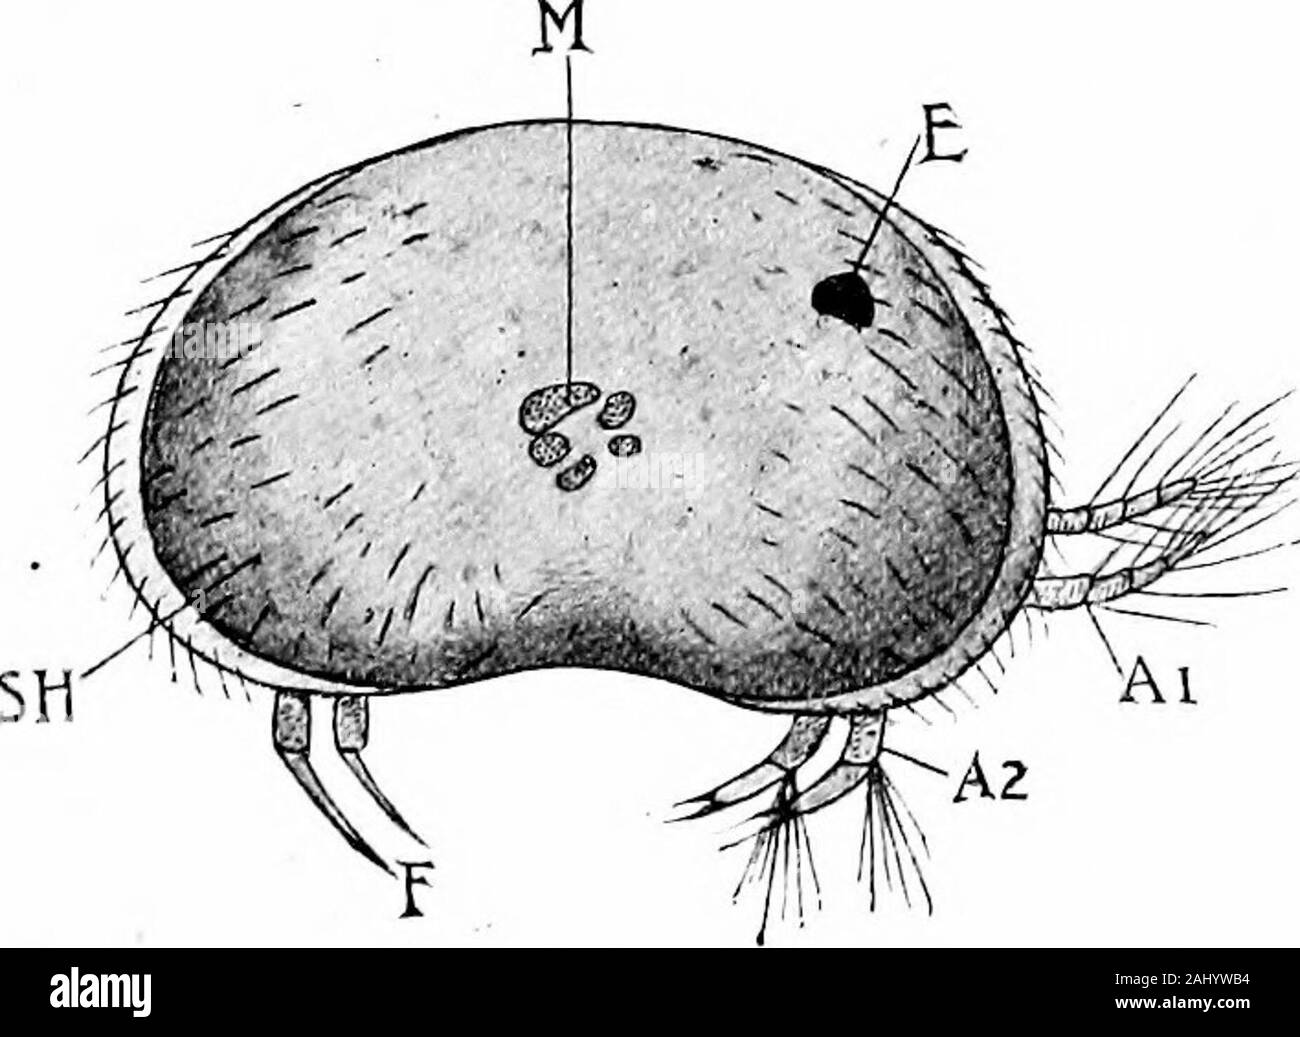 Outlines of zoology . hedthroughout the summer. Periodic parthenogenesis (of thesummer ova) is very common. Winter eggs, whichrequire fertilisation, are set adrift in a part of the shell modifiedto form a protective cradle or ephippium. Daphnia, Moina, Sida, Polyphemus^ Leptodora, and manyother water-fleas, are extraordinarily abundant in freshwater, and form part of the food of many fishes. A fewoccur in brackish and salt water.In Daphnia the appendages are:—antennules, antennae,mandibles, first maxillse, second maxilJEe (disappearing in thelarva), and five thoracic limbs. The abdomen is turn Stock Photo